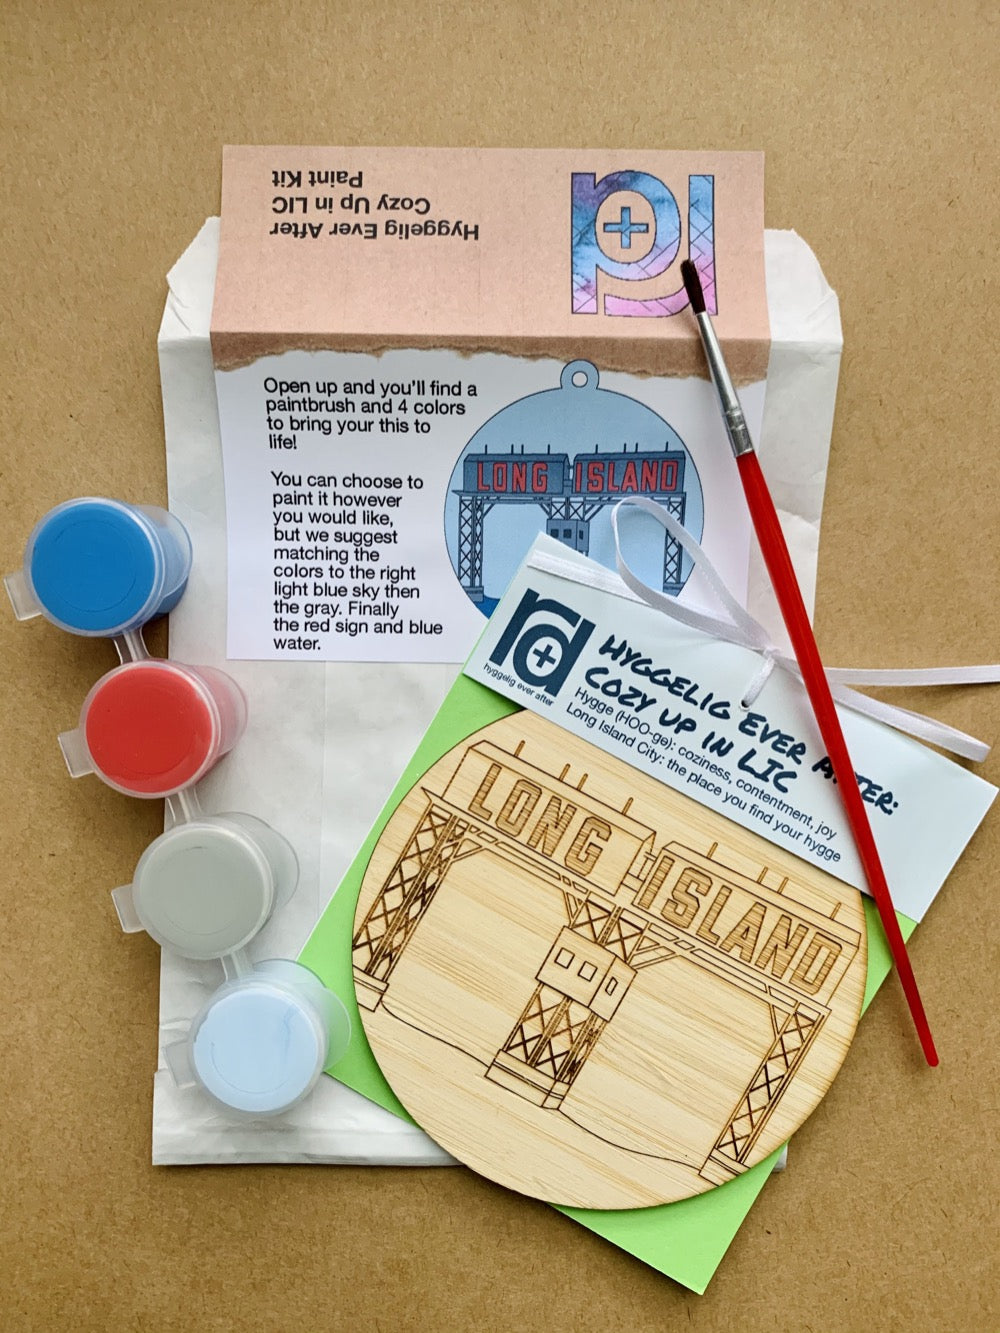 Shown laying on craft paper is the packaging and contents of this DIY Paint Kit. There is a paper envelope with instructions, a paintbrush, a set of 4 paint wells and a wall hanging with a laser cut NYC landmark.